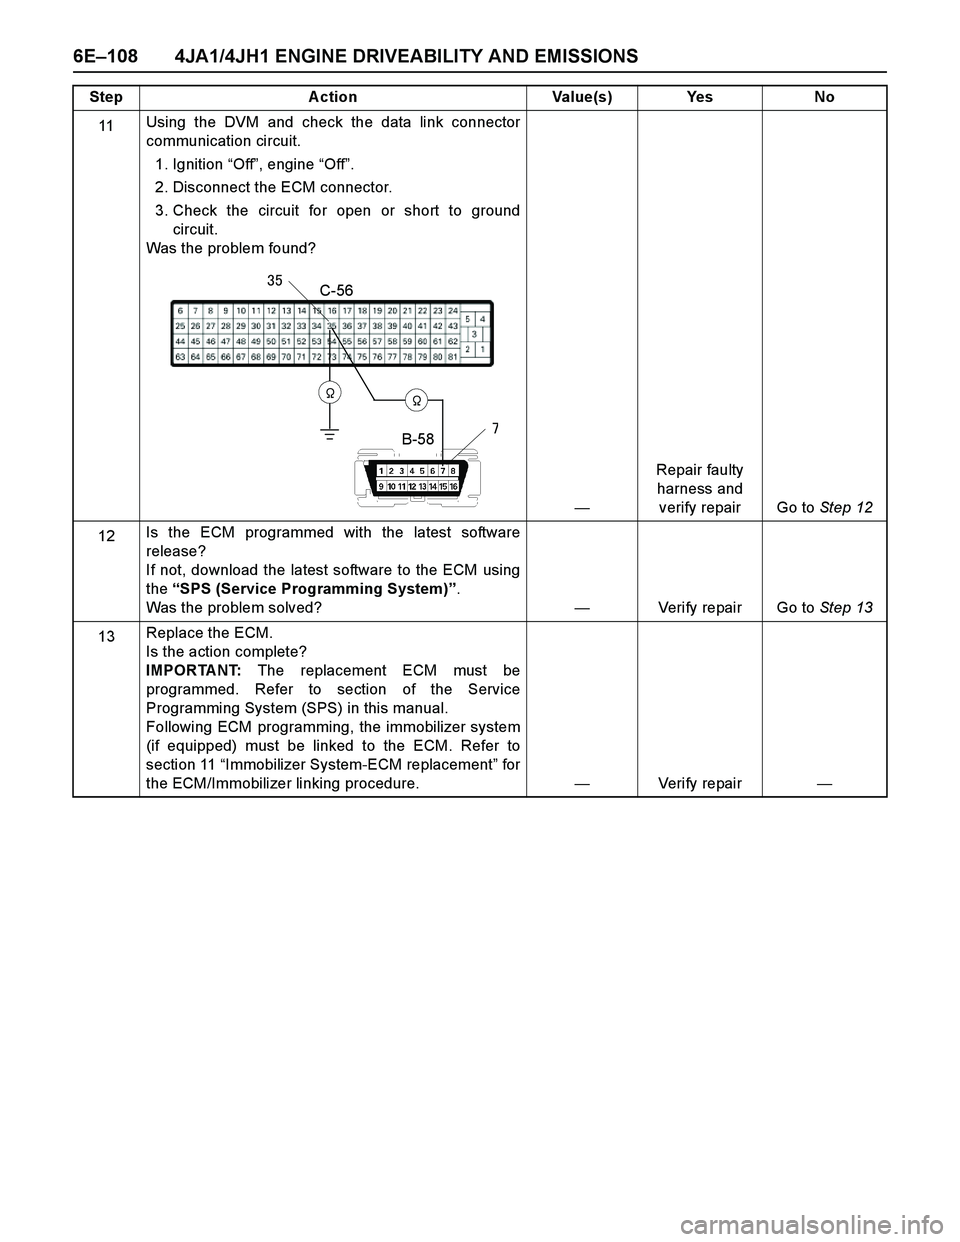 ISUZU TF SERIES 2004  Workshop Manual 6E–108 4JA1/4JH1 ENGINE DRIVEABILITY AND EMISSIONS
11Using the DVM and check the data link connector
communication circuit.
1. Ignition “Off”, engine “Off”. 
2. Disconnect the ECM connector.